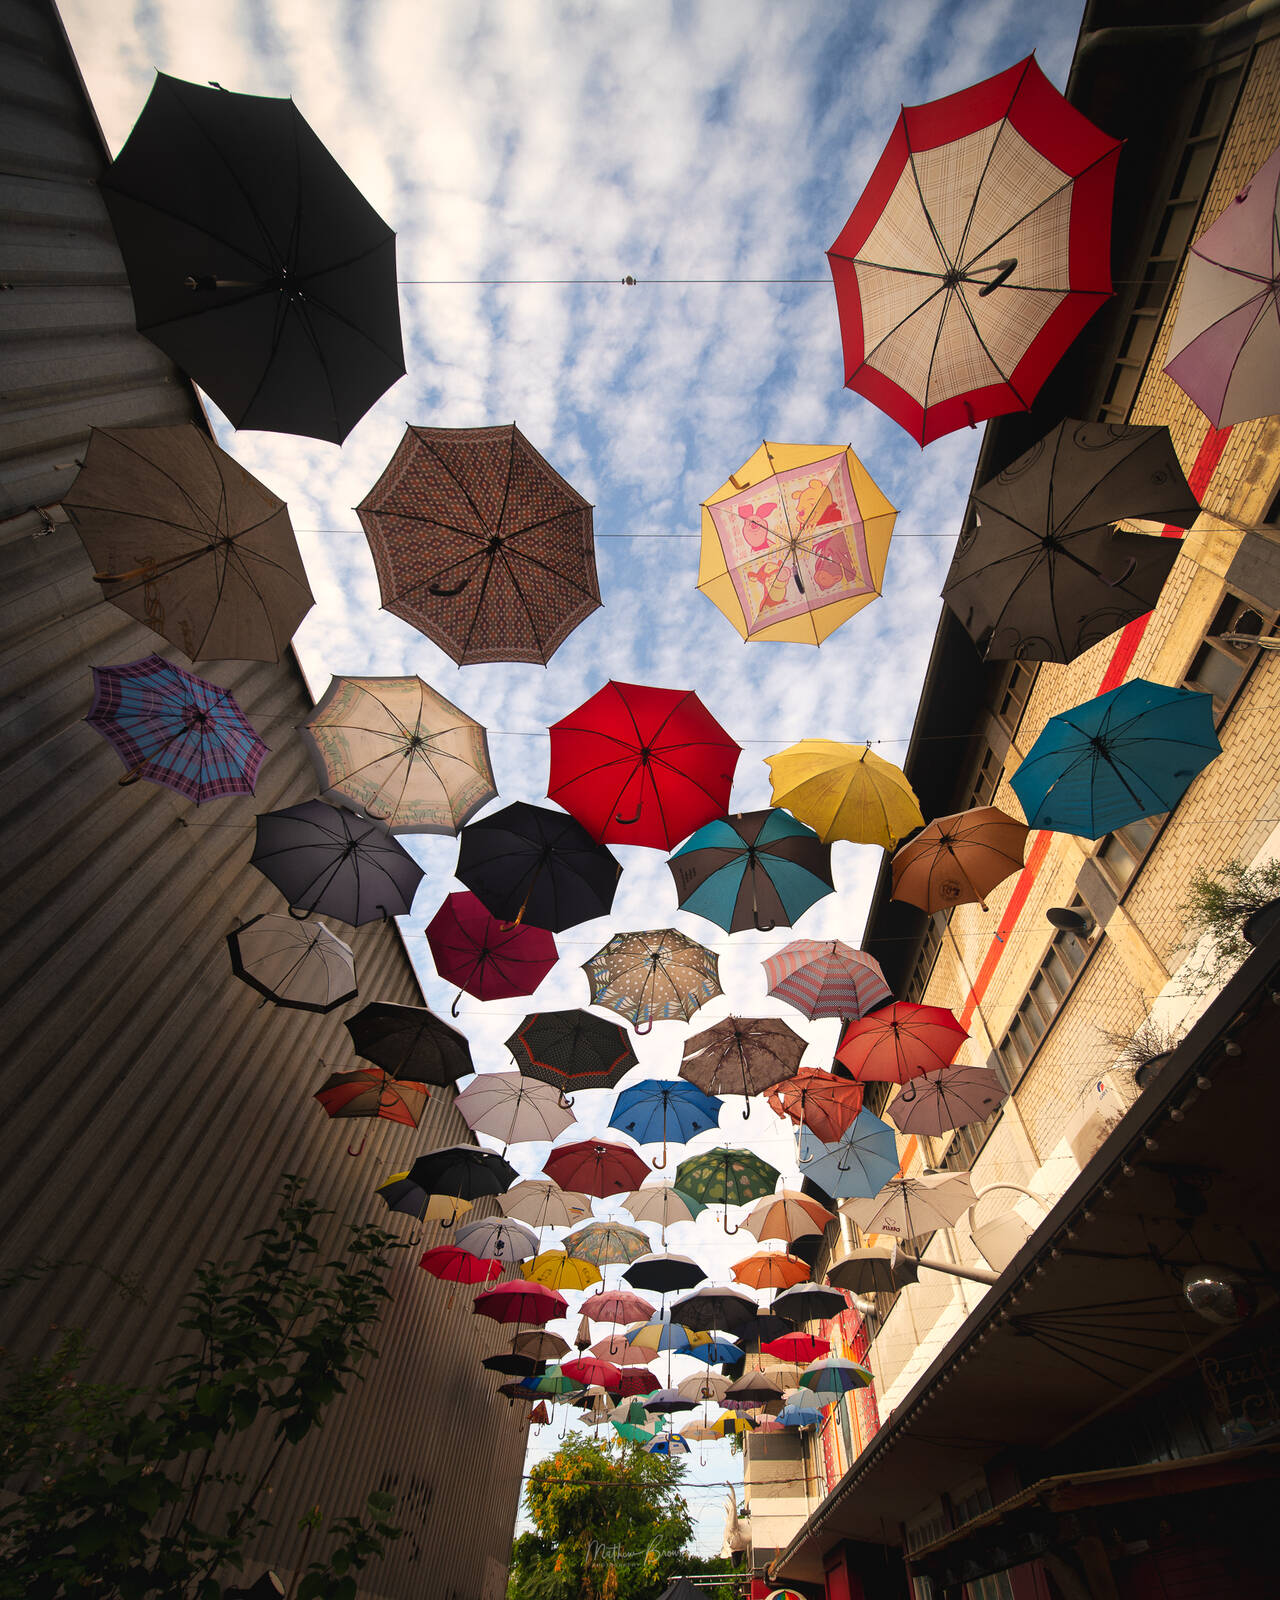 Image of Zurich Alley of Hanging Umbrellas by Mathew Browne